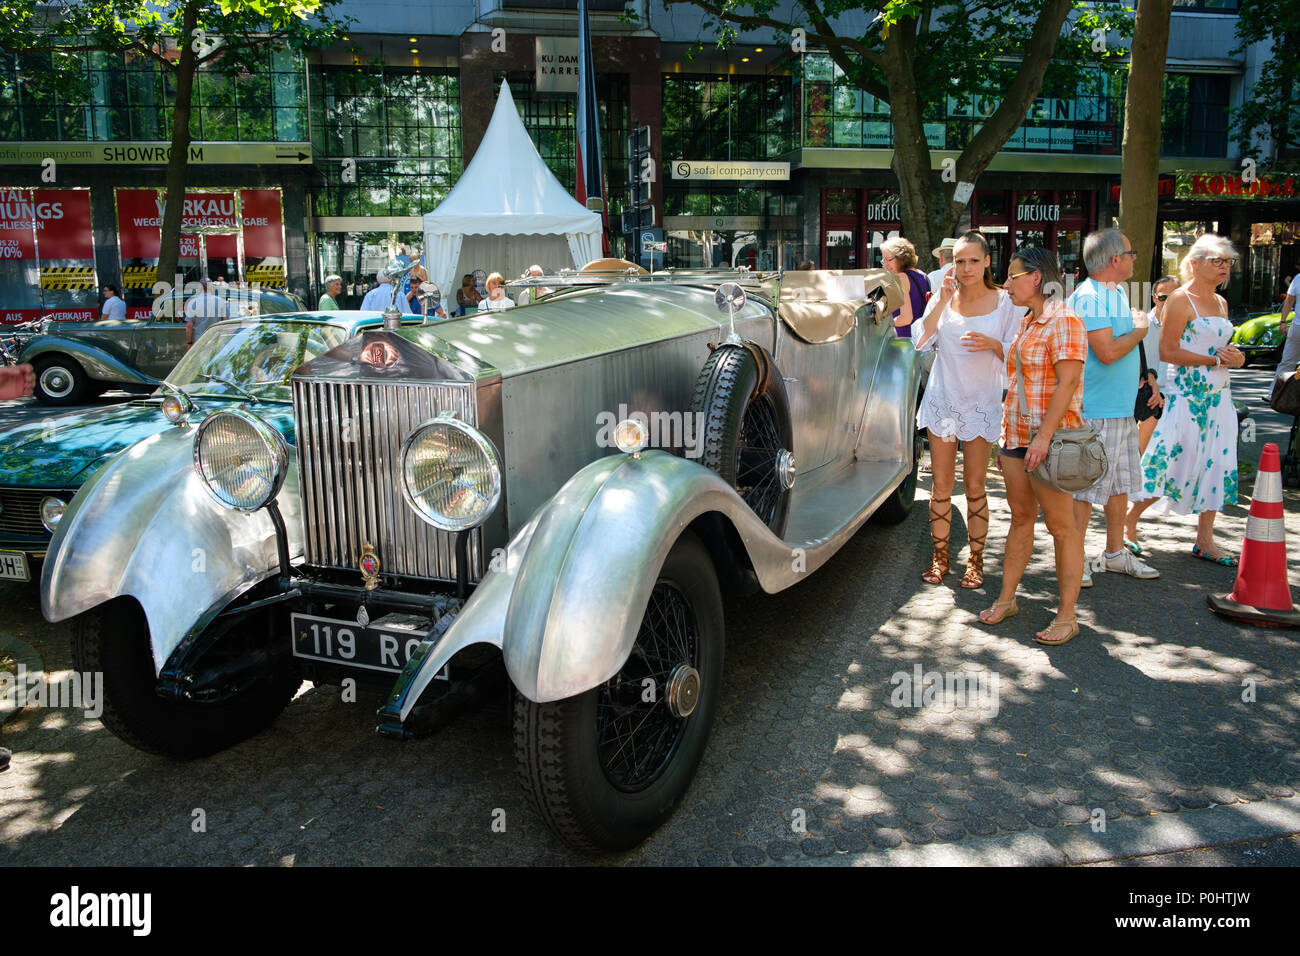 Berlin, Germany - june 09, 2018: Old Rolls Royce Phantom at Berlin Classic Days, a Oldtimer automobile event for  vintage cars and historic vehicles at Kurfuerstendamm / Kudamm in Berlin Credit: hanohiki/Alamy Live News Stock Photo